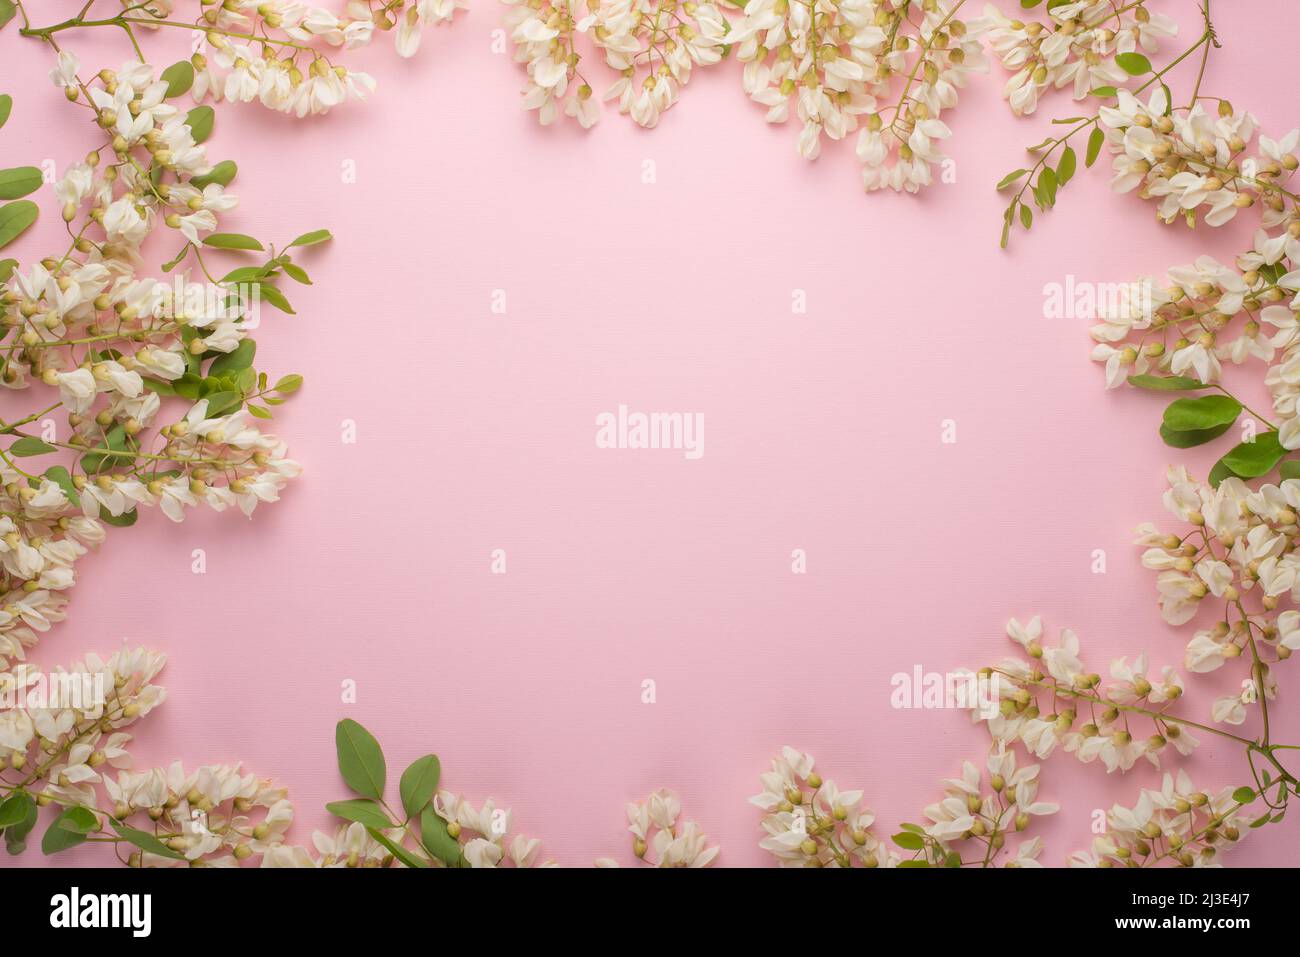 Spring floral background, textures and wallpaper. Flat white flower flowers on a light pink background, top view, copy space. Festive greeting card fo Stock Photo